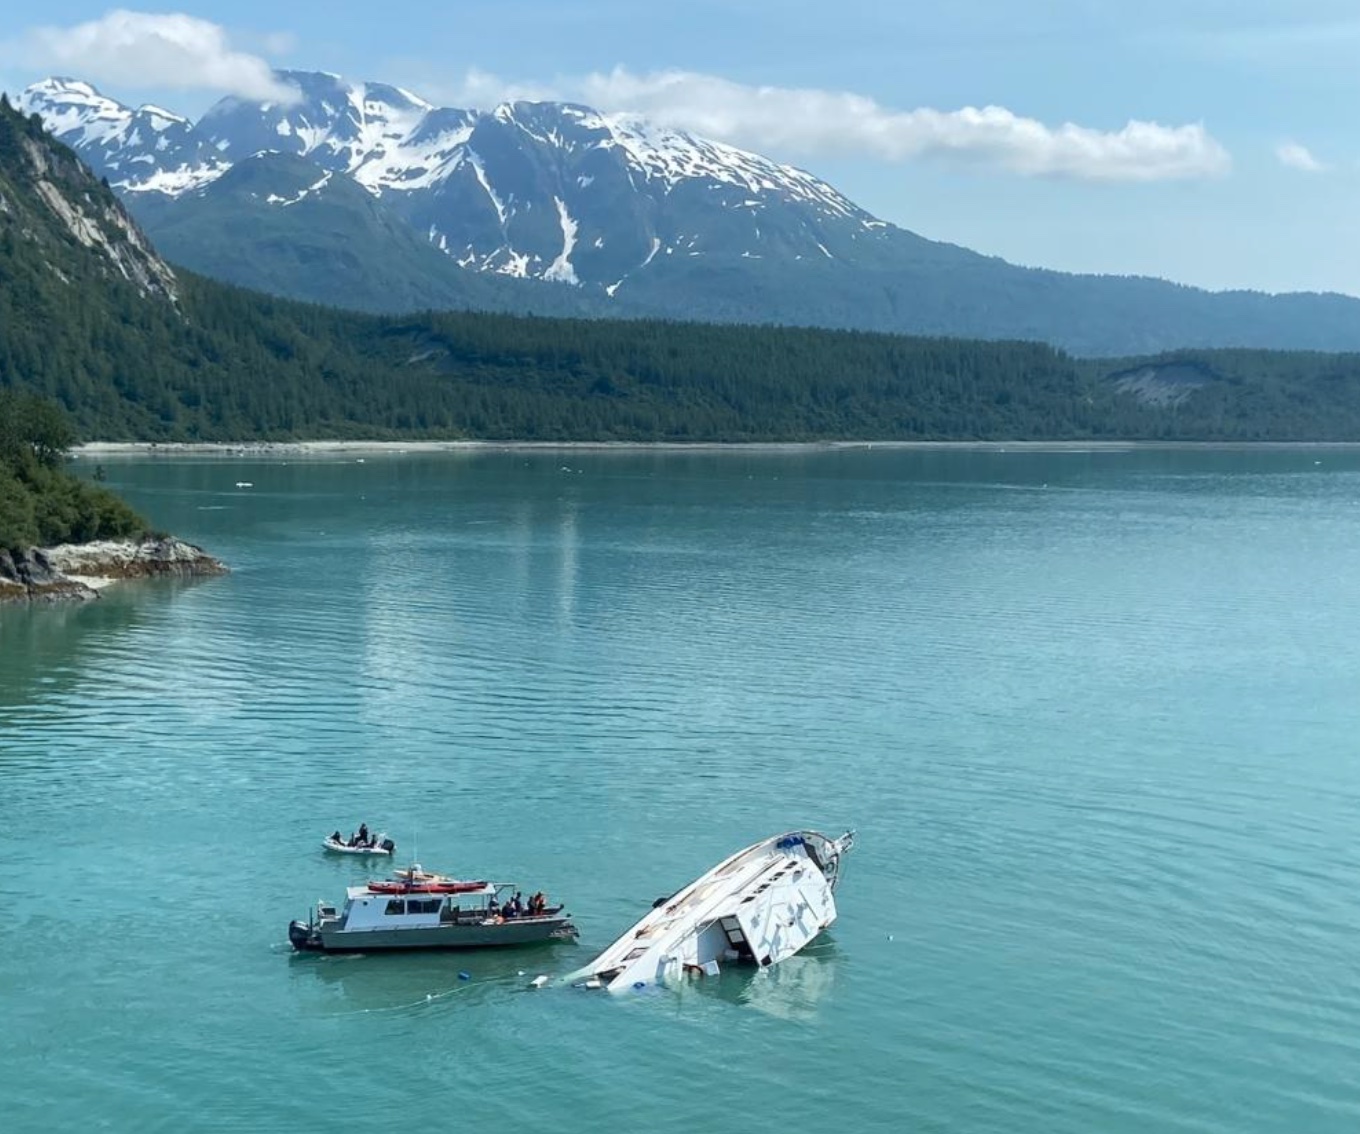 Seattle-based yacht sinks in Glacier Bay, four rescued